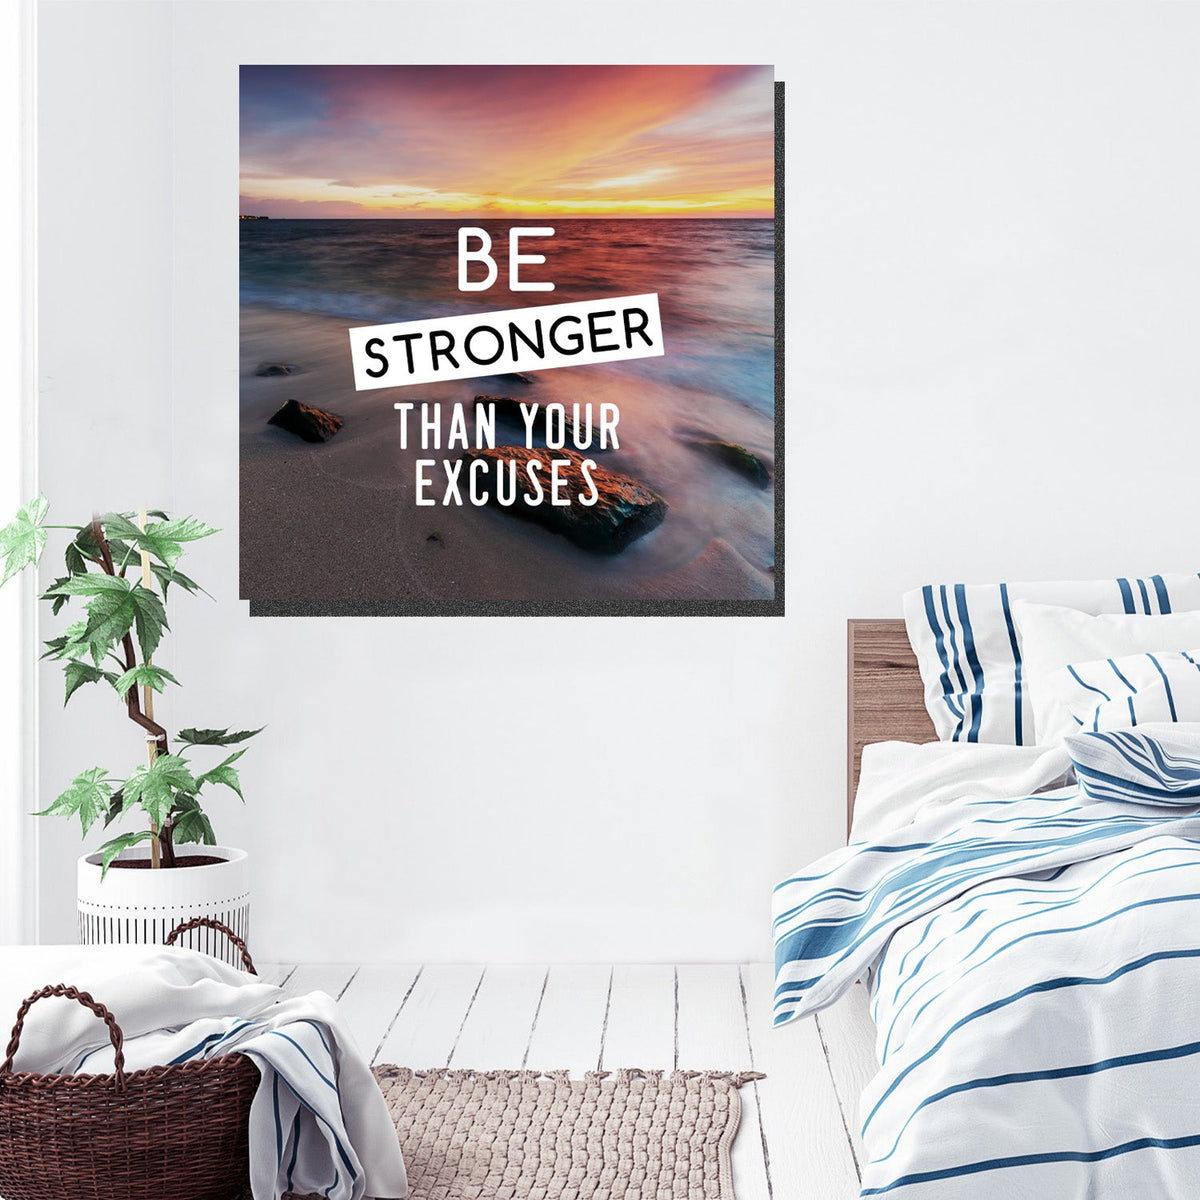 https://cdn.shopify.com/s/files/1/0387/9986/8044/products/BeStrongerCanvasArtprintStretched-1.jpg